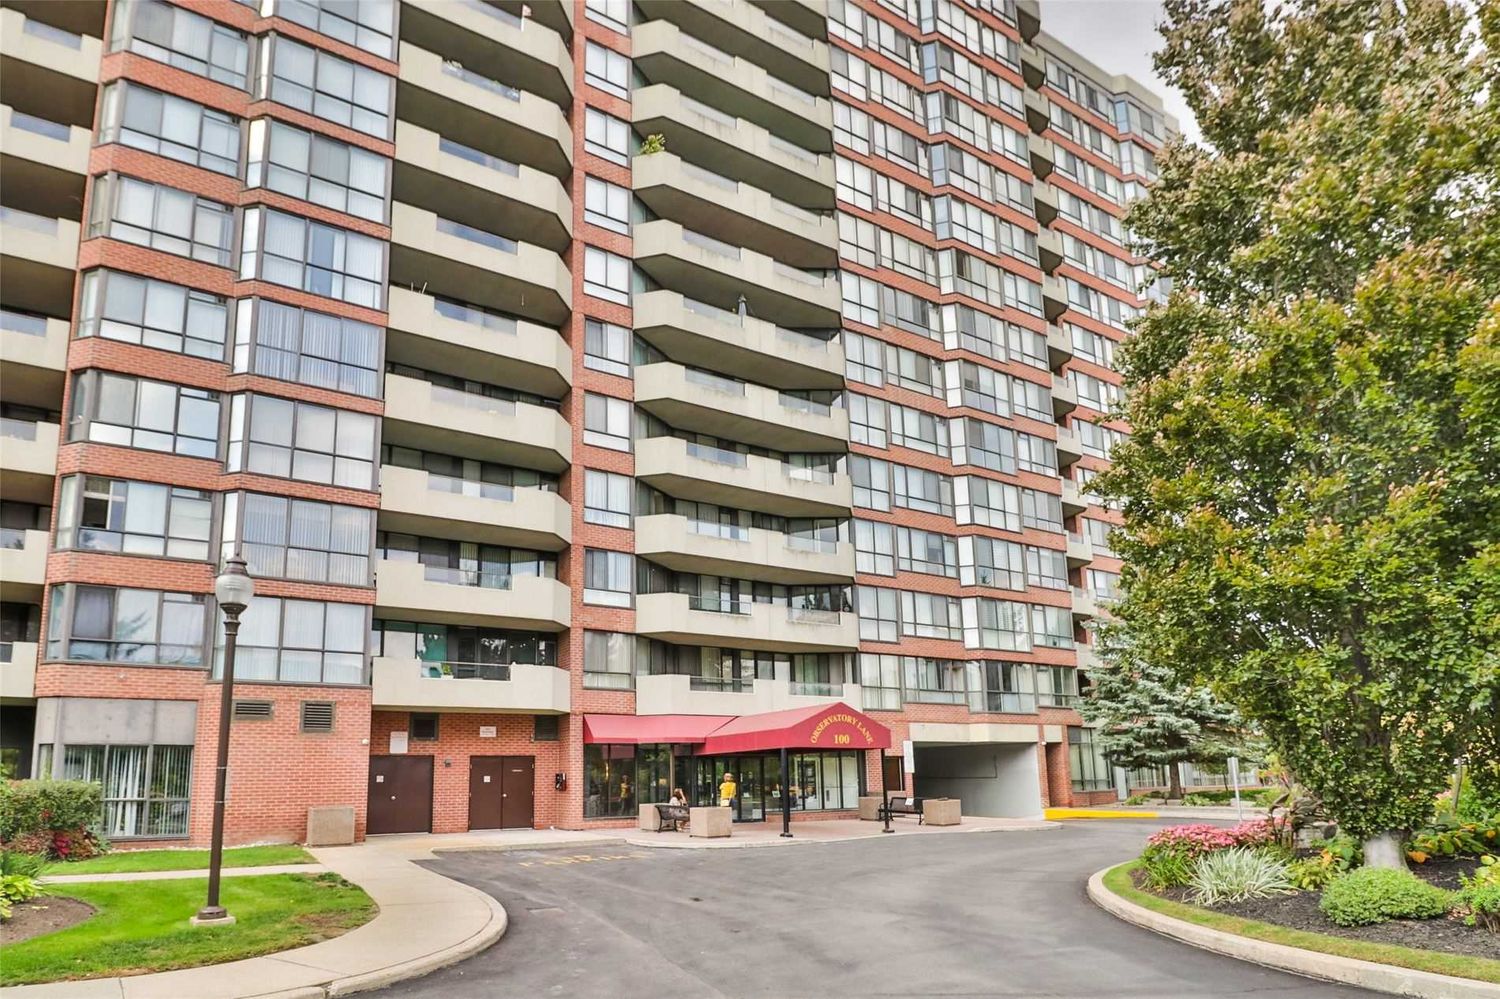 100 Observatory Lane. Observatory Lane Condo is located in  Richmond Hill, Toronto - image #2 of 3